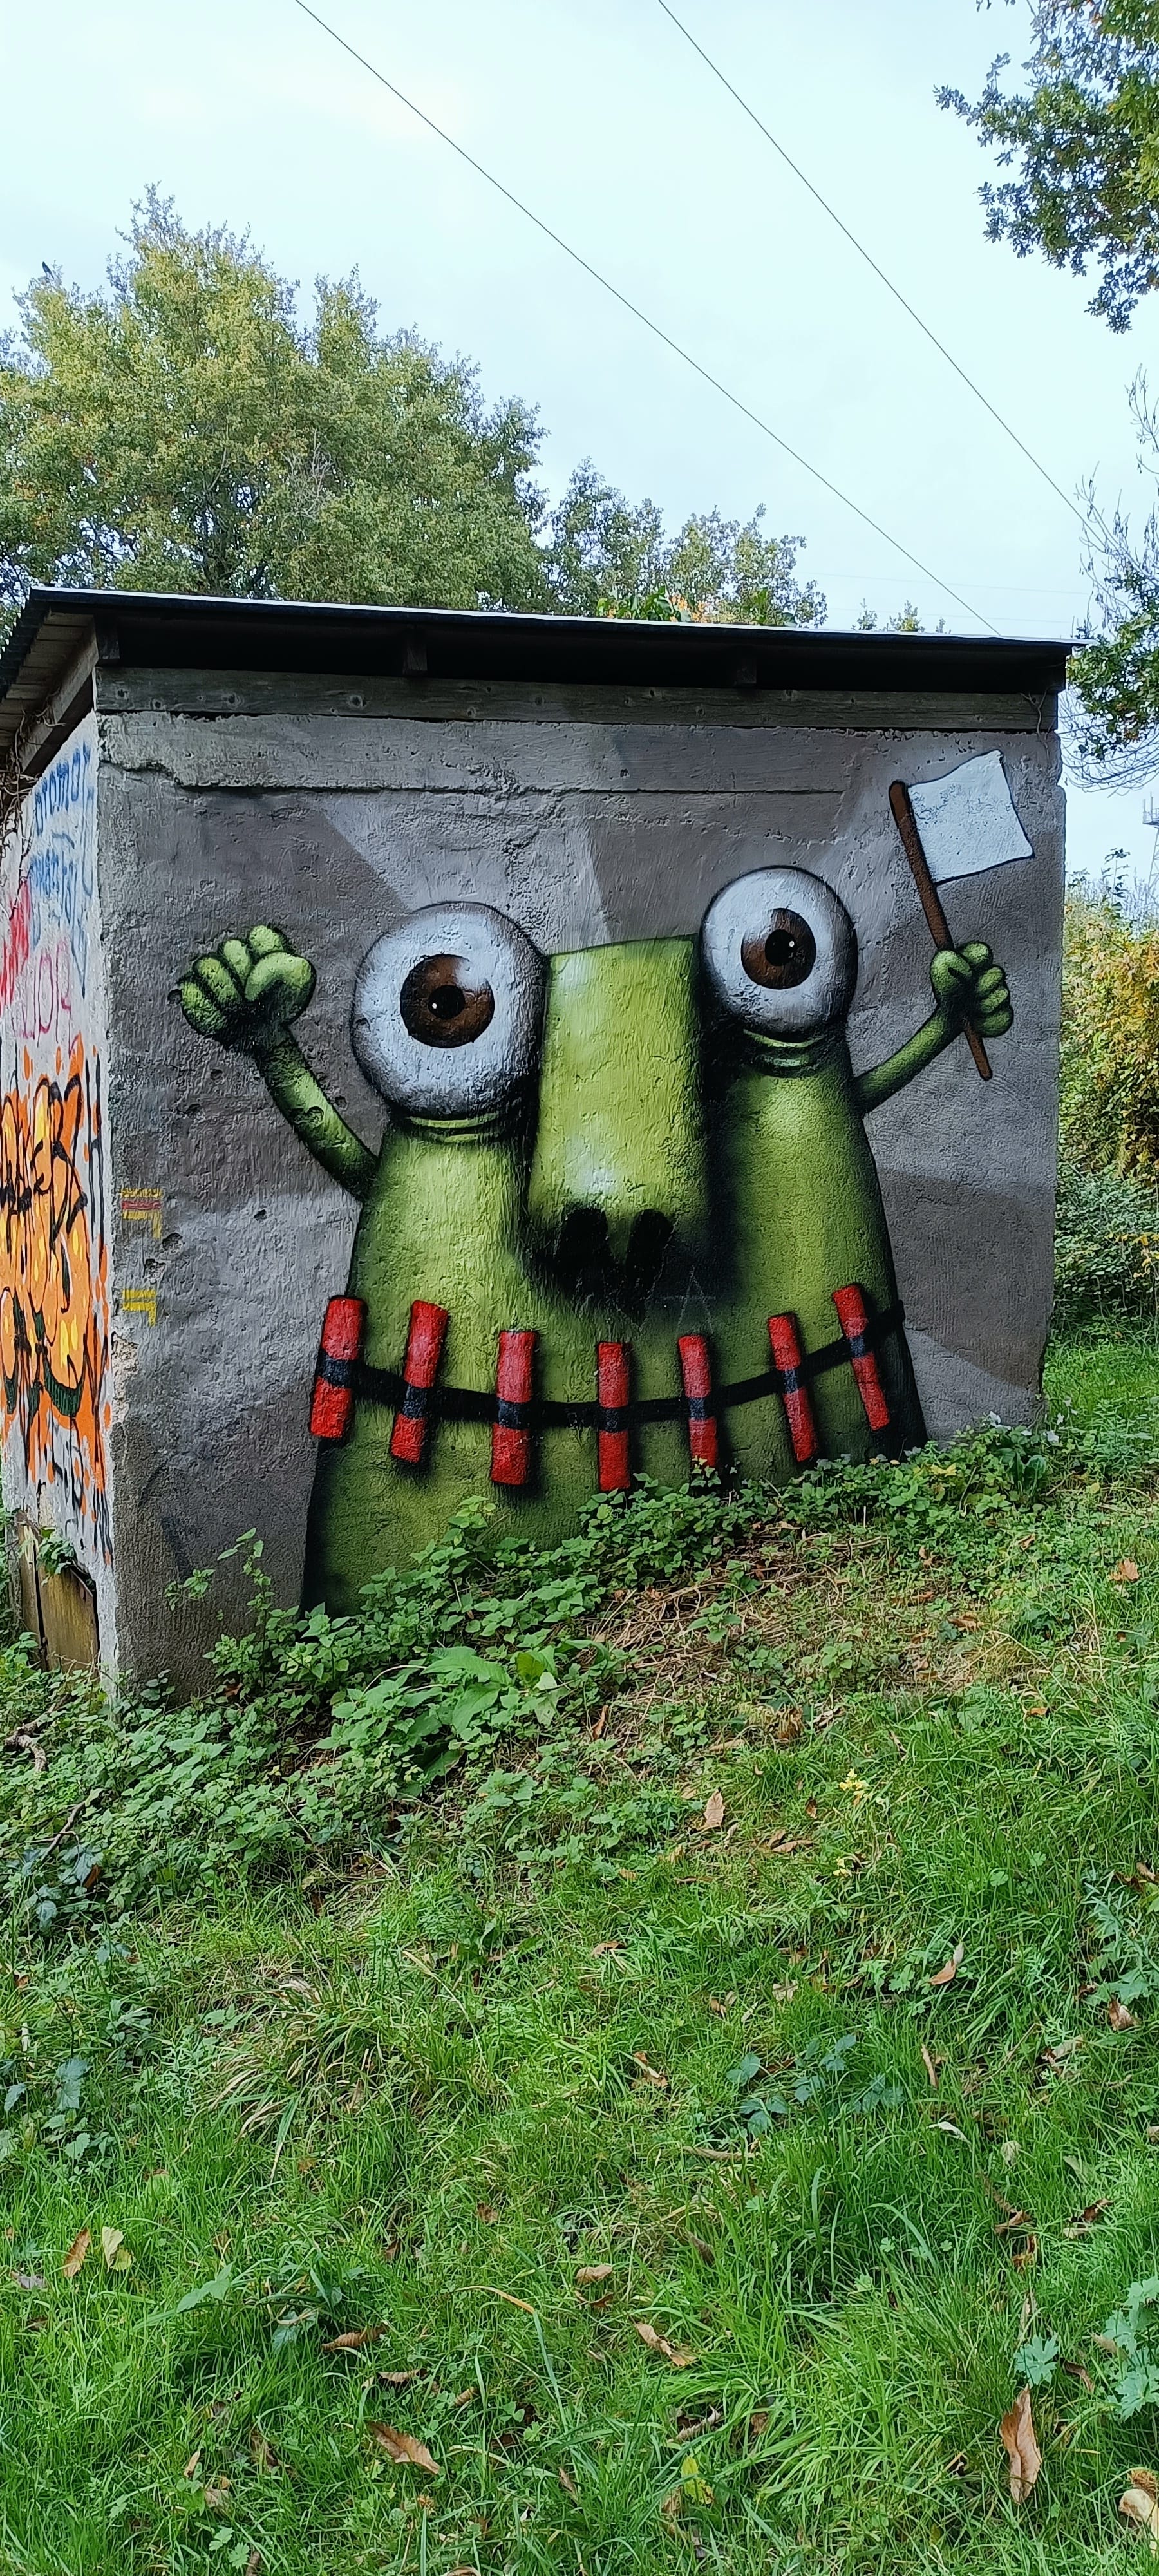 Graffiti 5476  by the artist Ador captured by Rabot in Vertou France